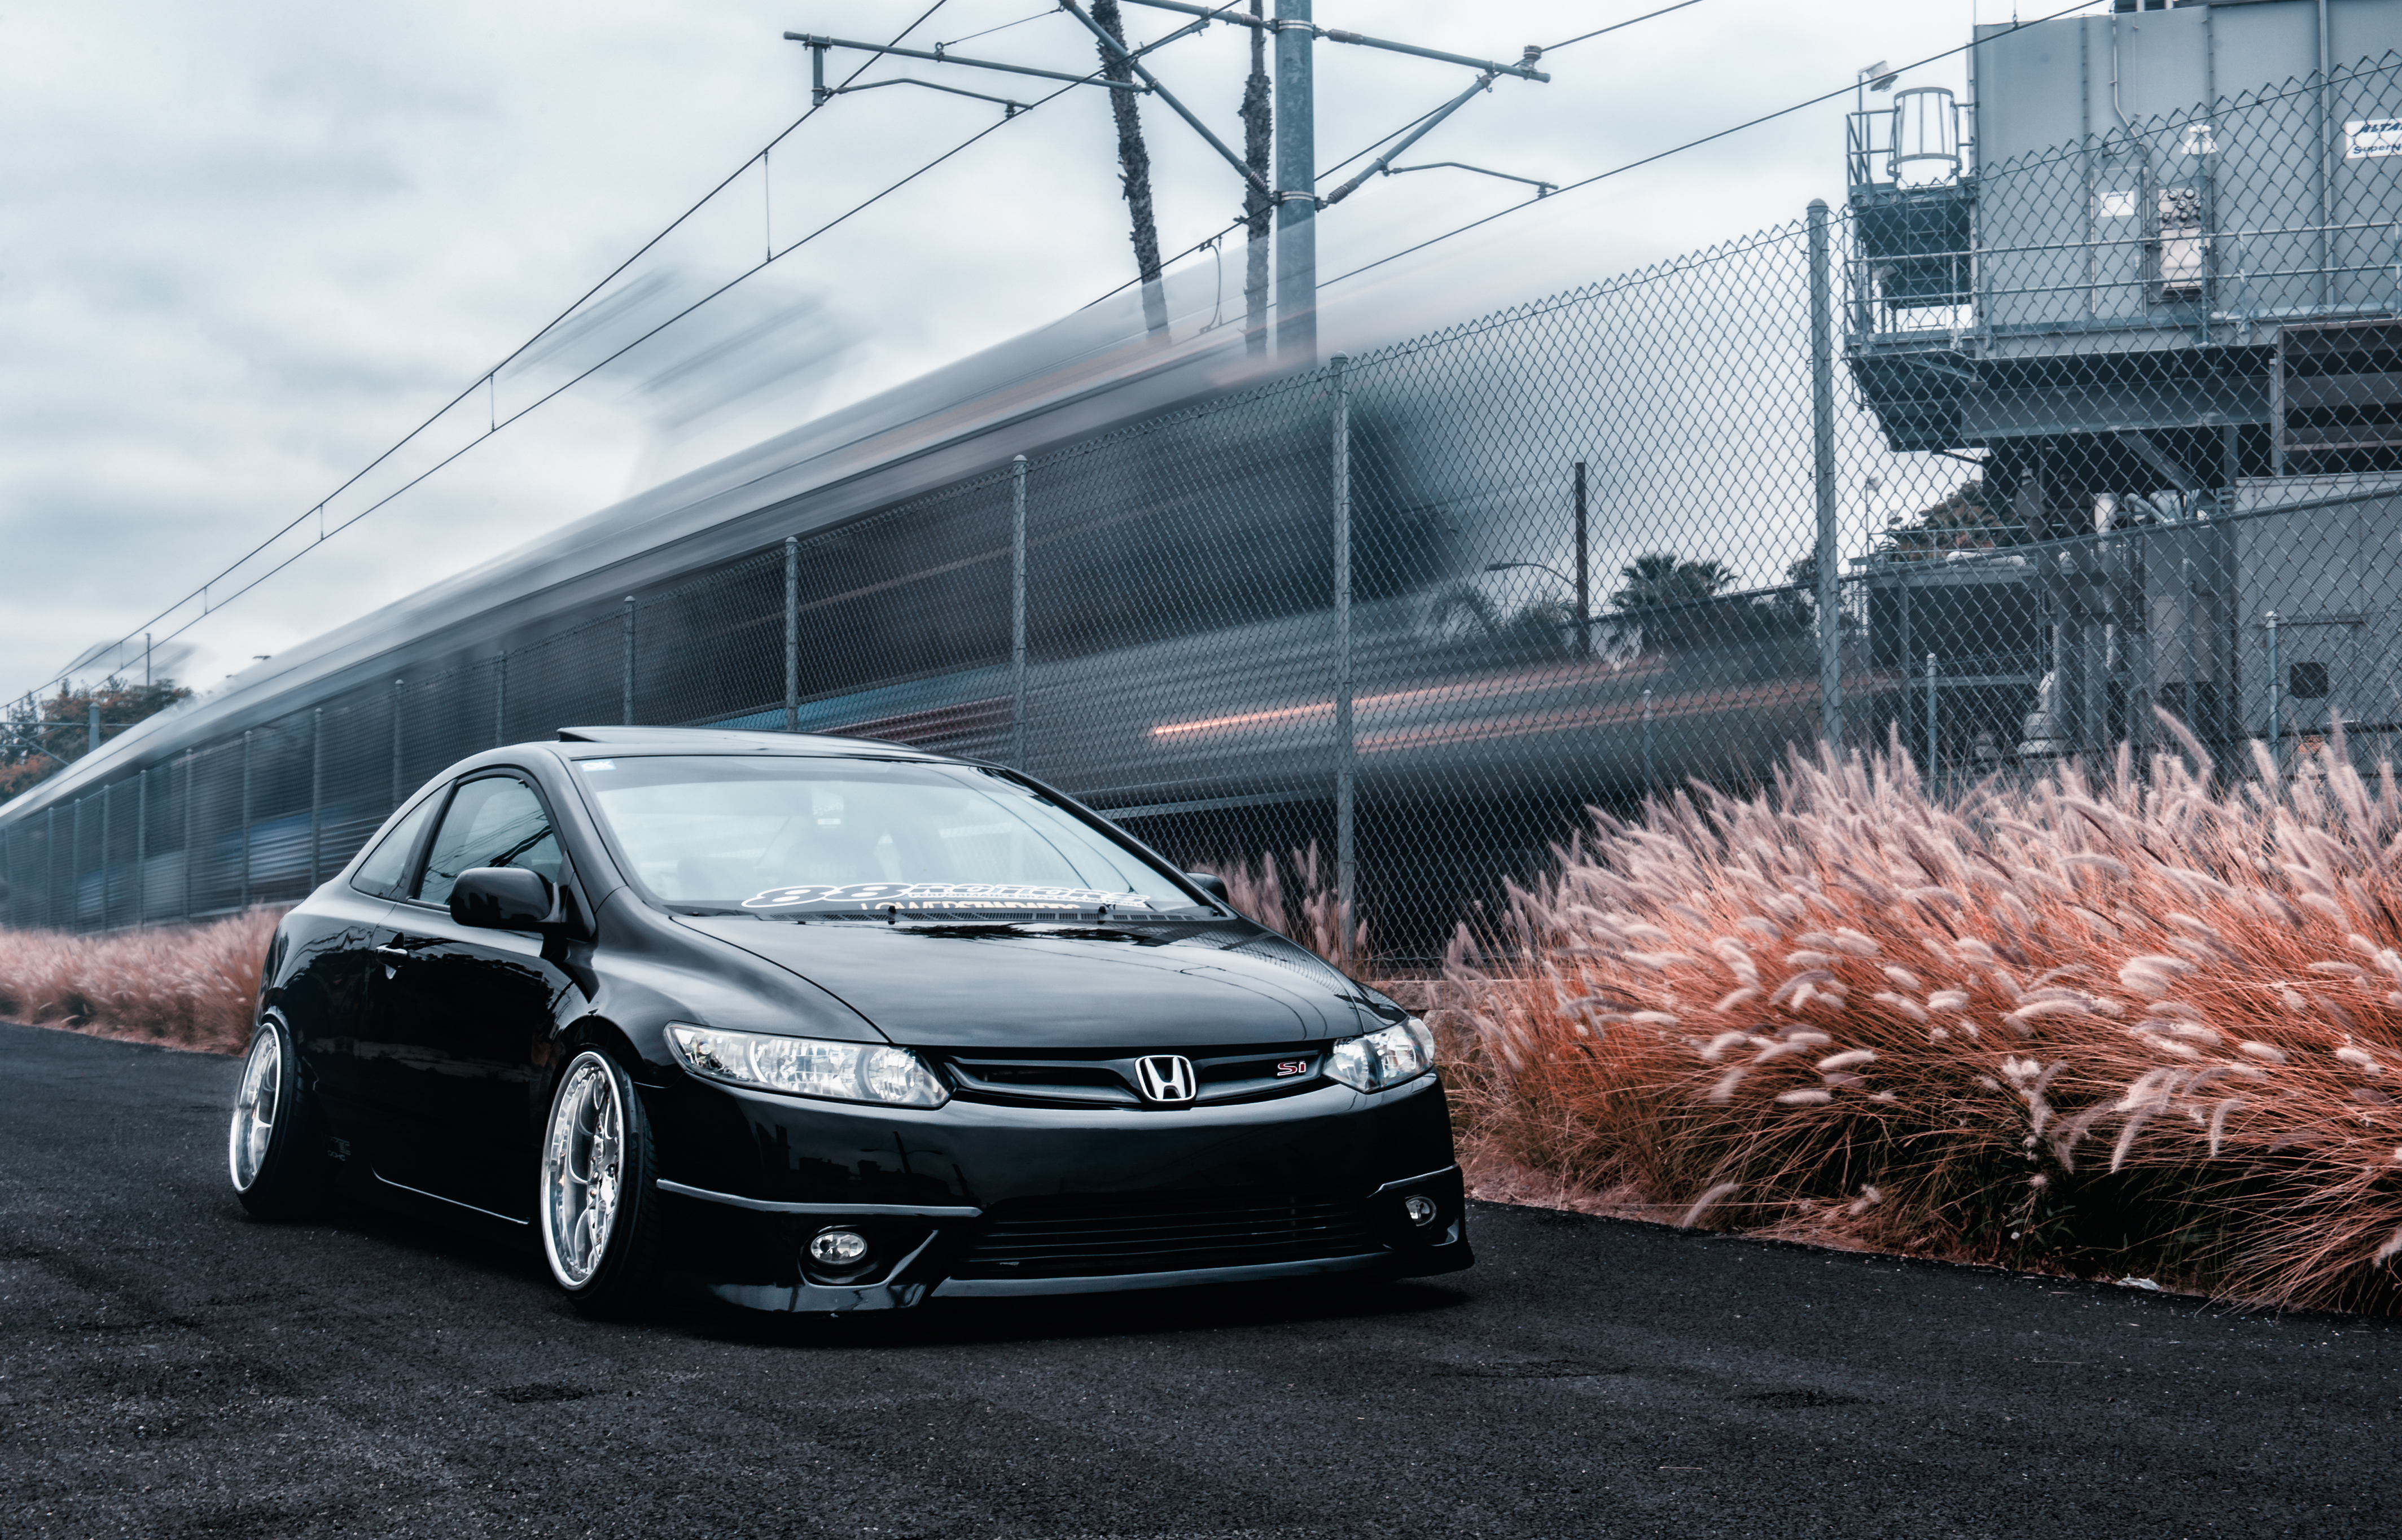 50+ Honda Civic HD Wallpapers and Backgrounds